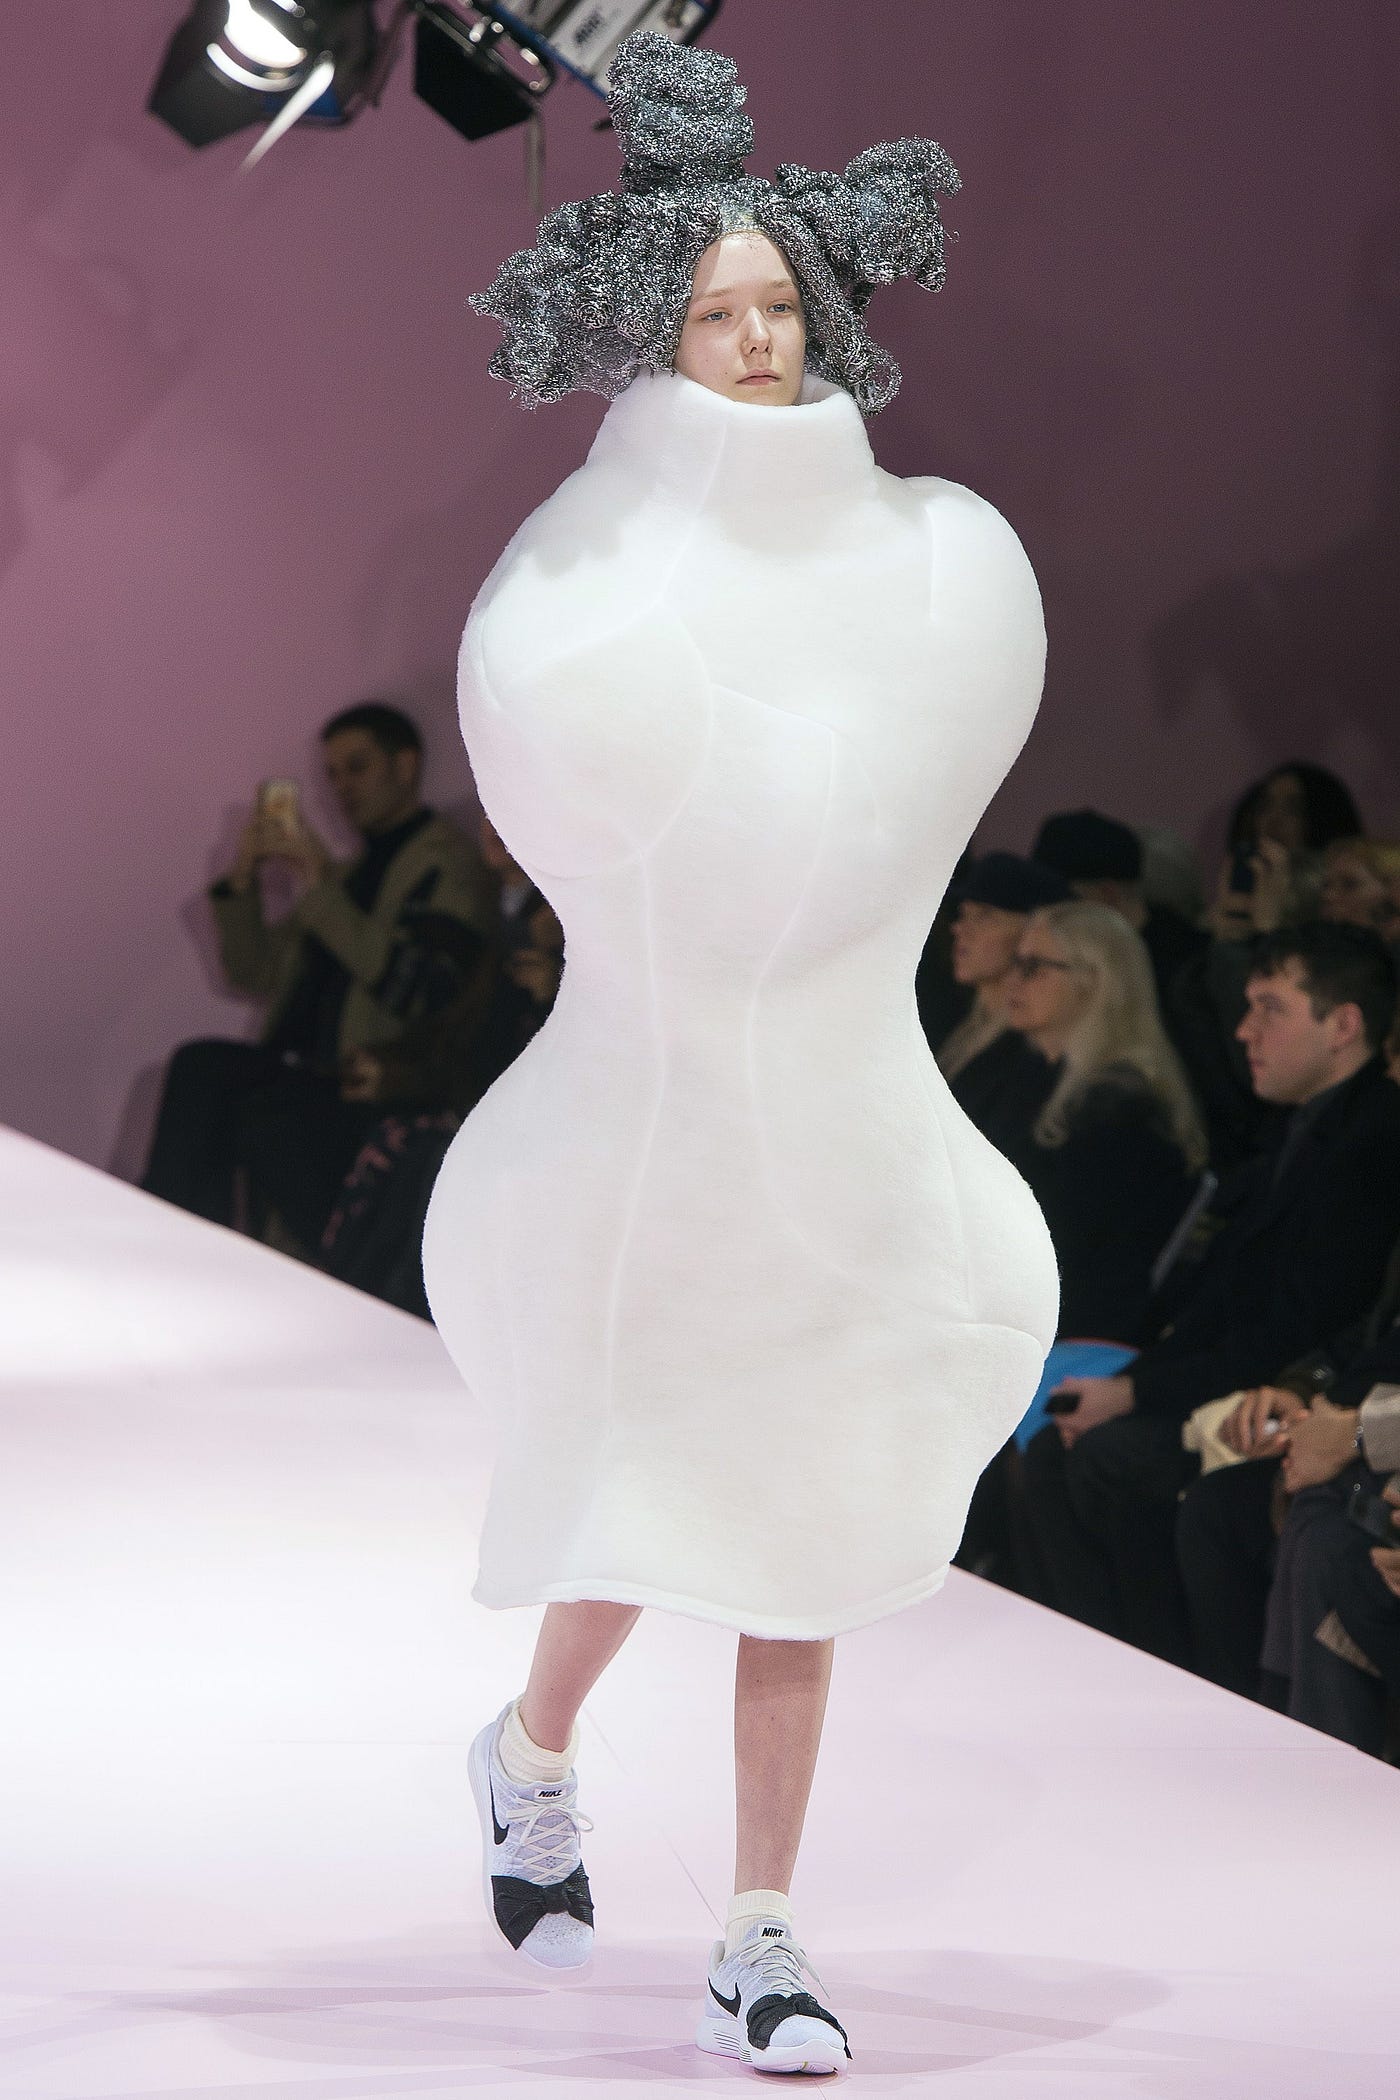 Why are Fashion shows filled with unwearable garments?, by Renaud Petit